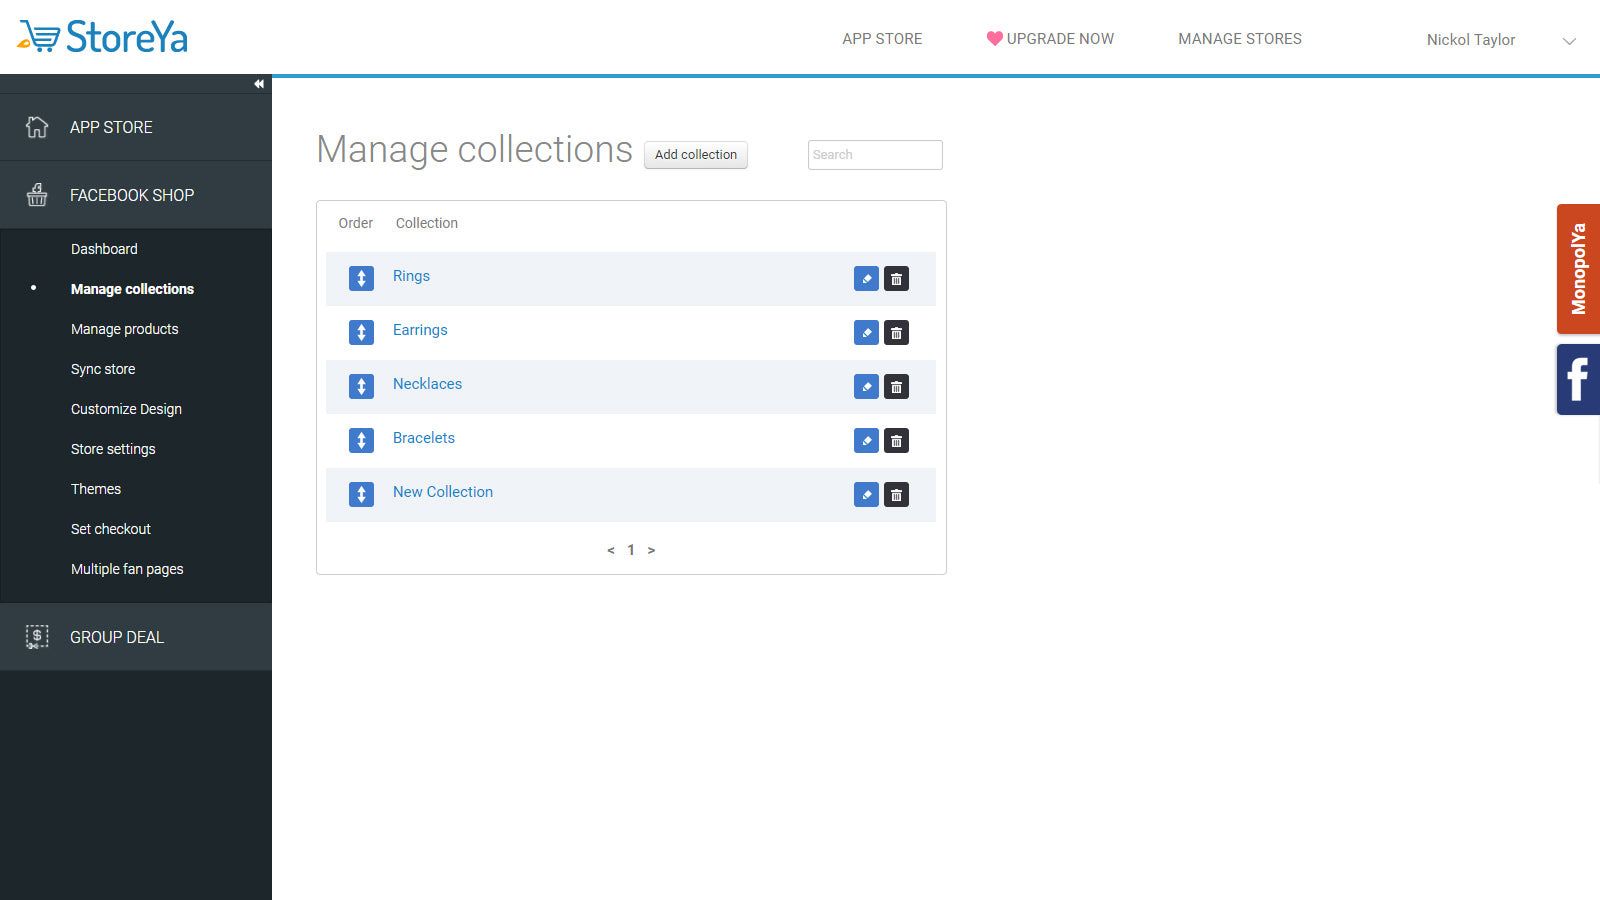 Back-office: manage collections